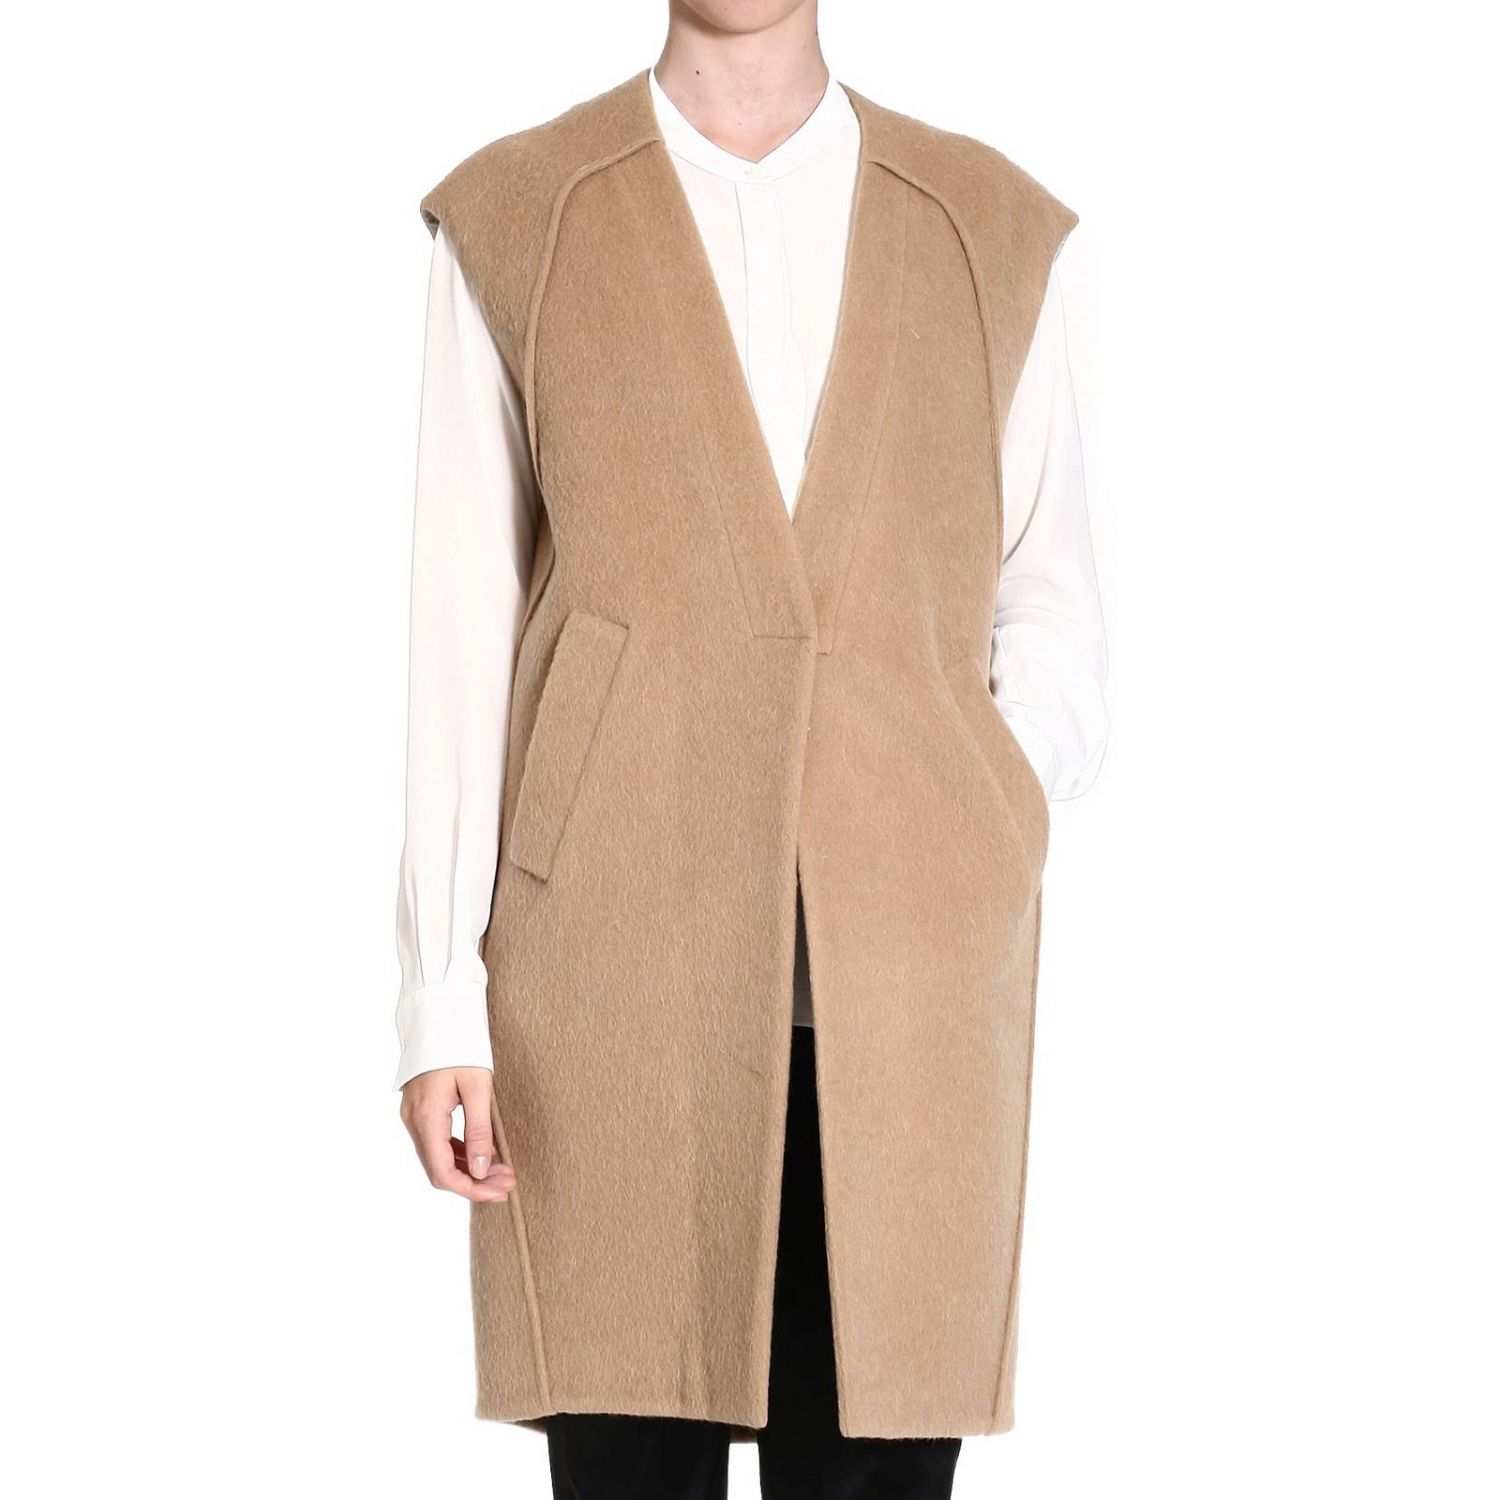 Mauro Grifoni Coat Sleeveless Mohair Wool in Beige (Camel) | Lyst